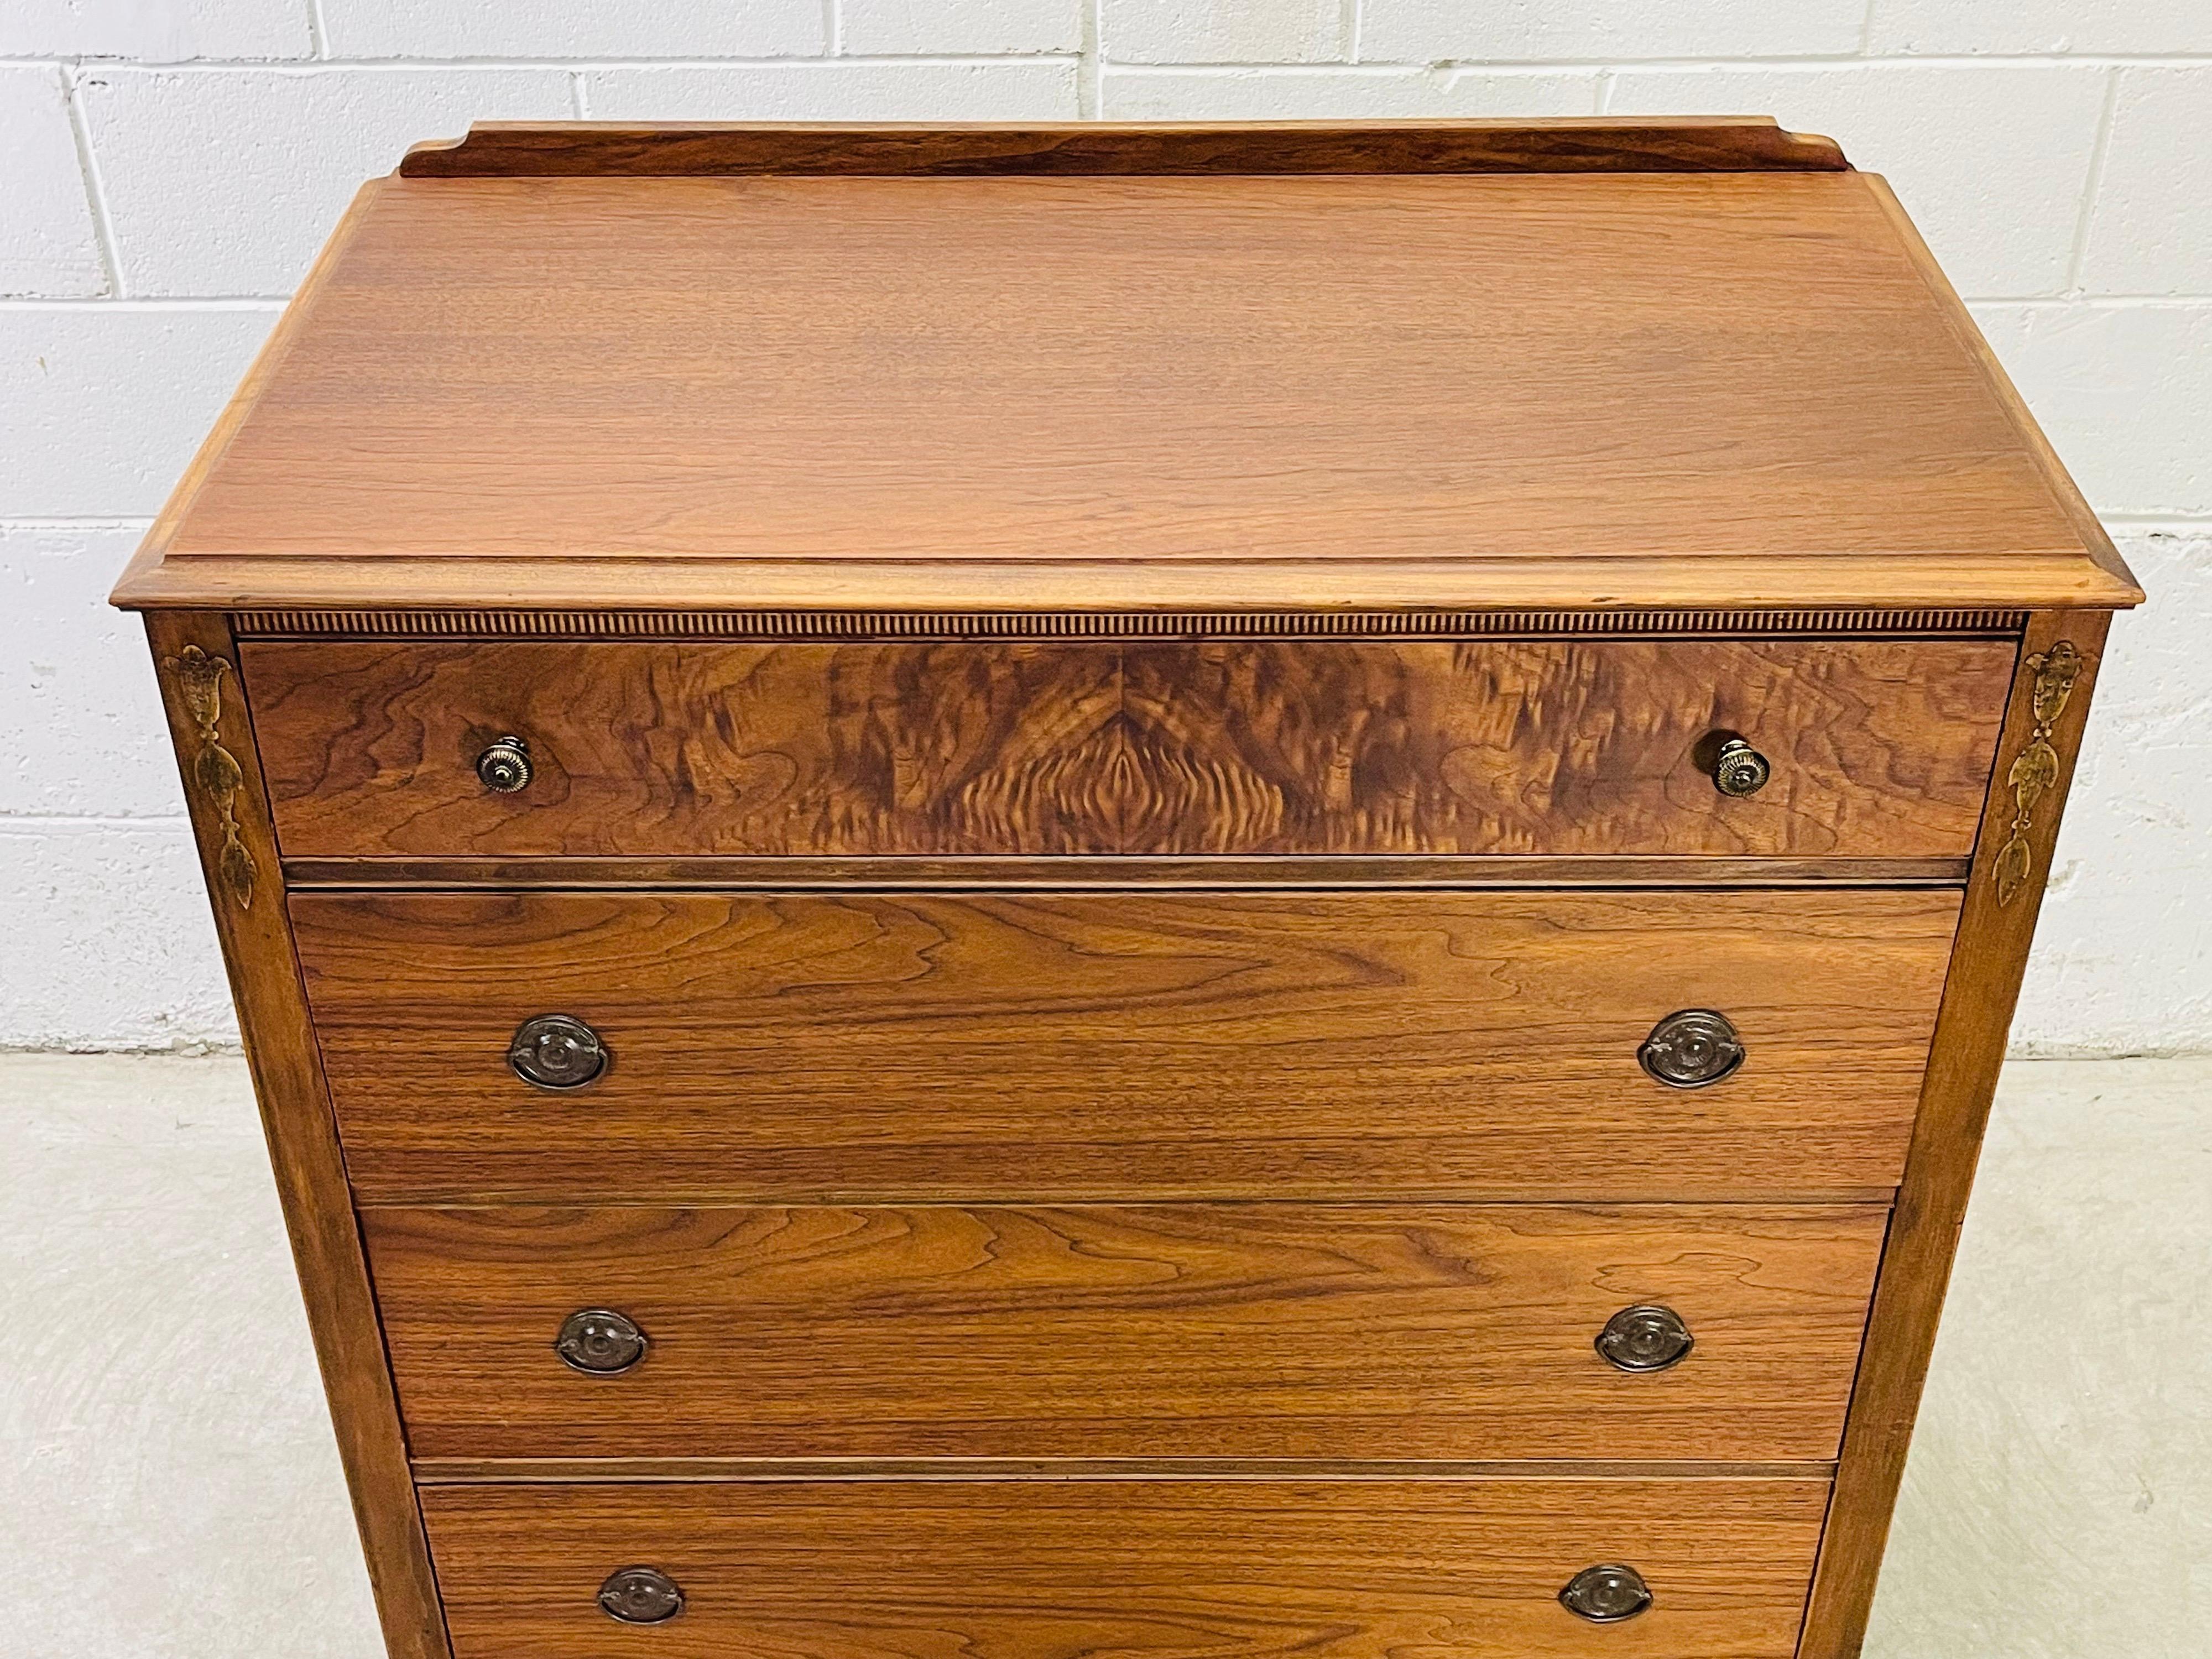 Vintage Art Deco style tall walnut wood dresser with four drawers. The top draw has a burl wood accented front. The dresser also has other decorative accents. The drawers measure 4” -7”H and the drawers interiors are oak wood. Lots of storage and a